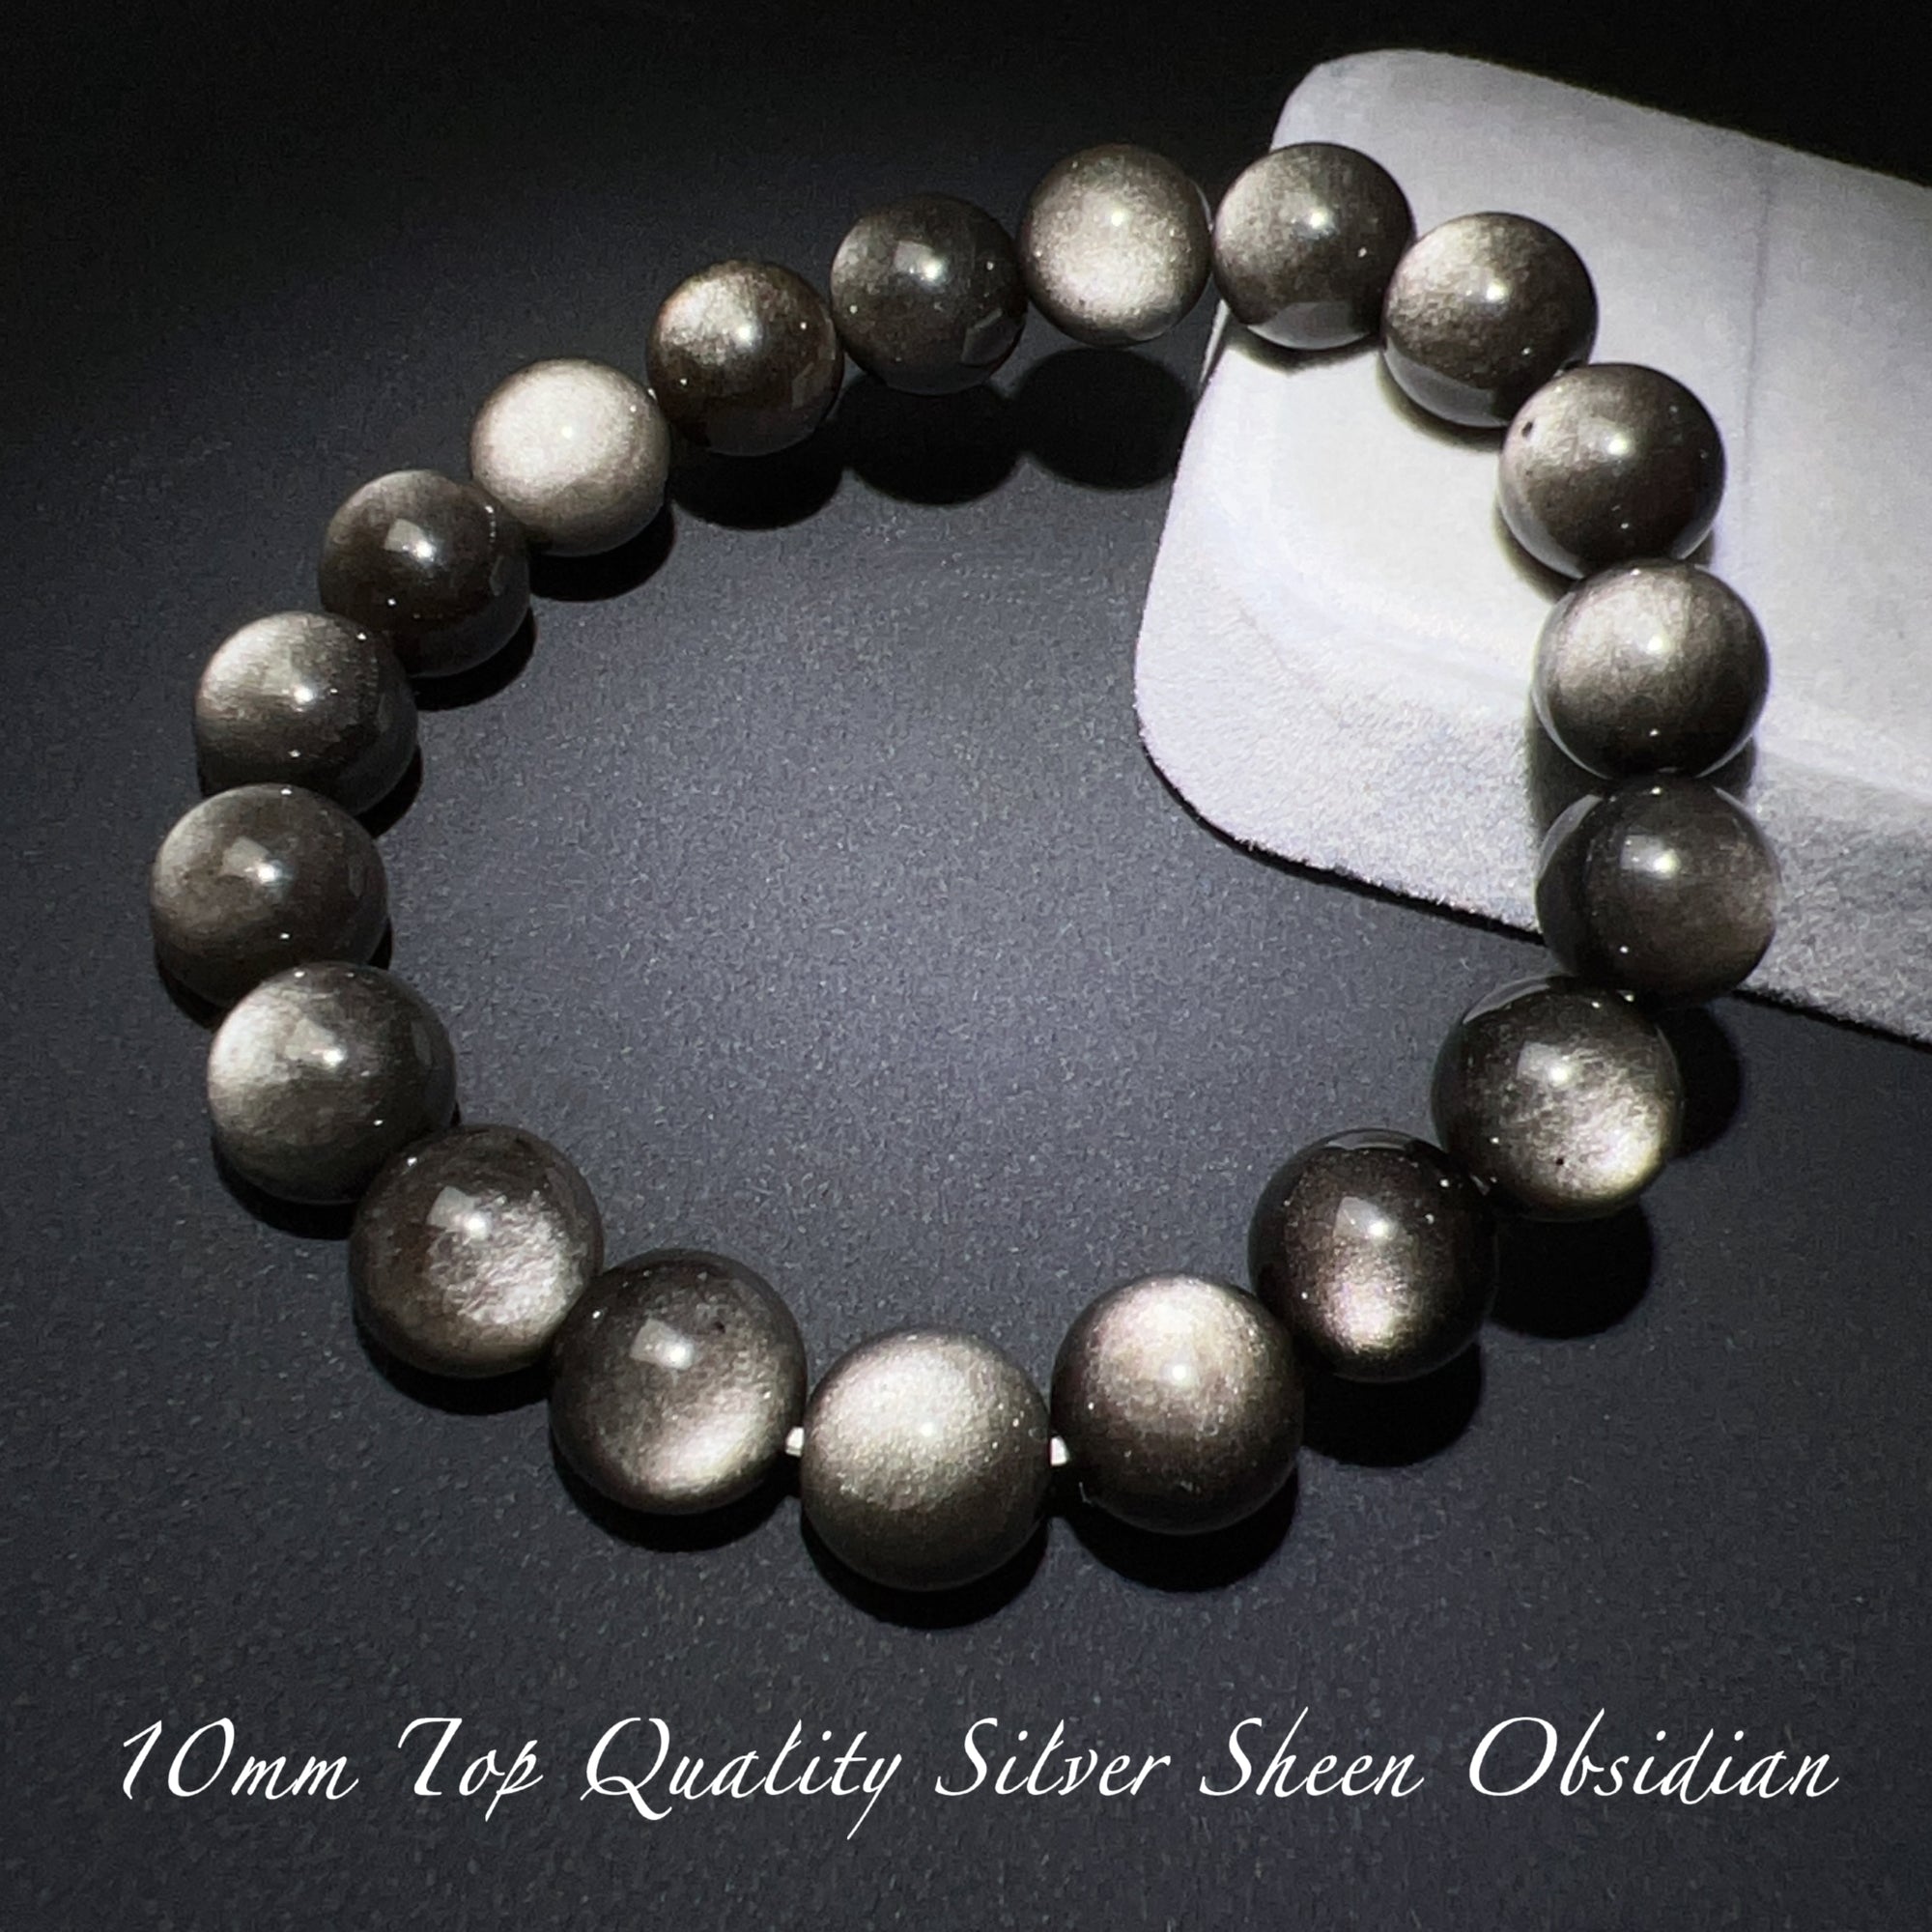 Obsidian is a highly-regarded protective stone that can block, absorb, and transform negative energy